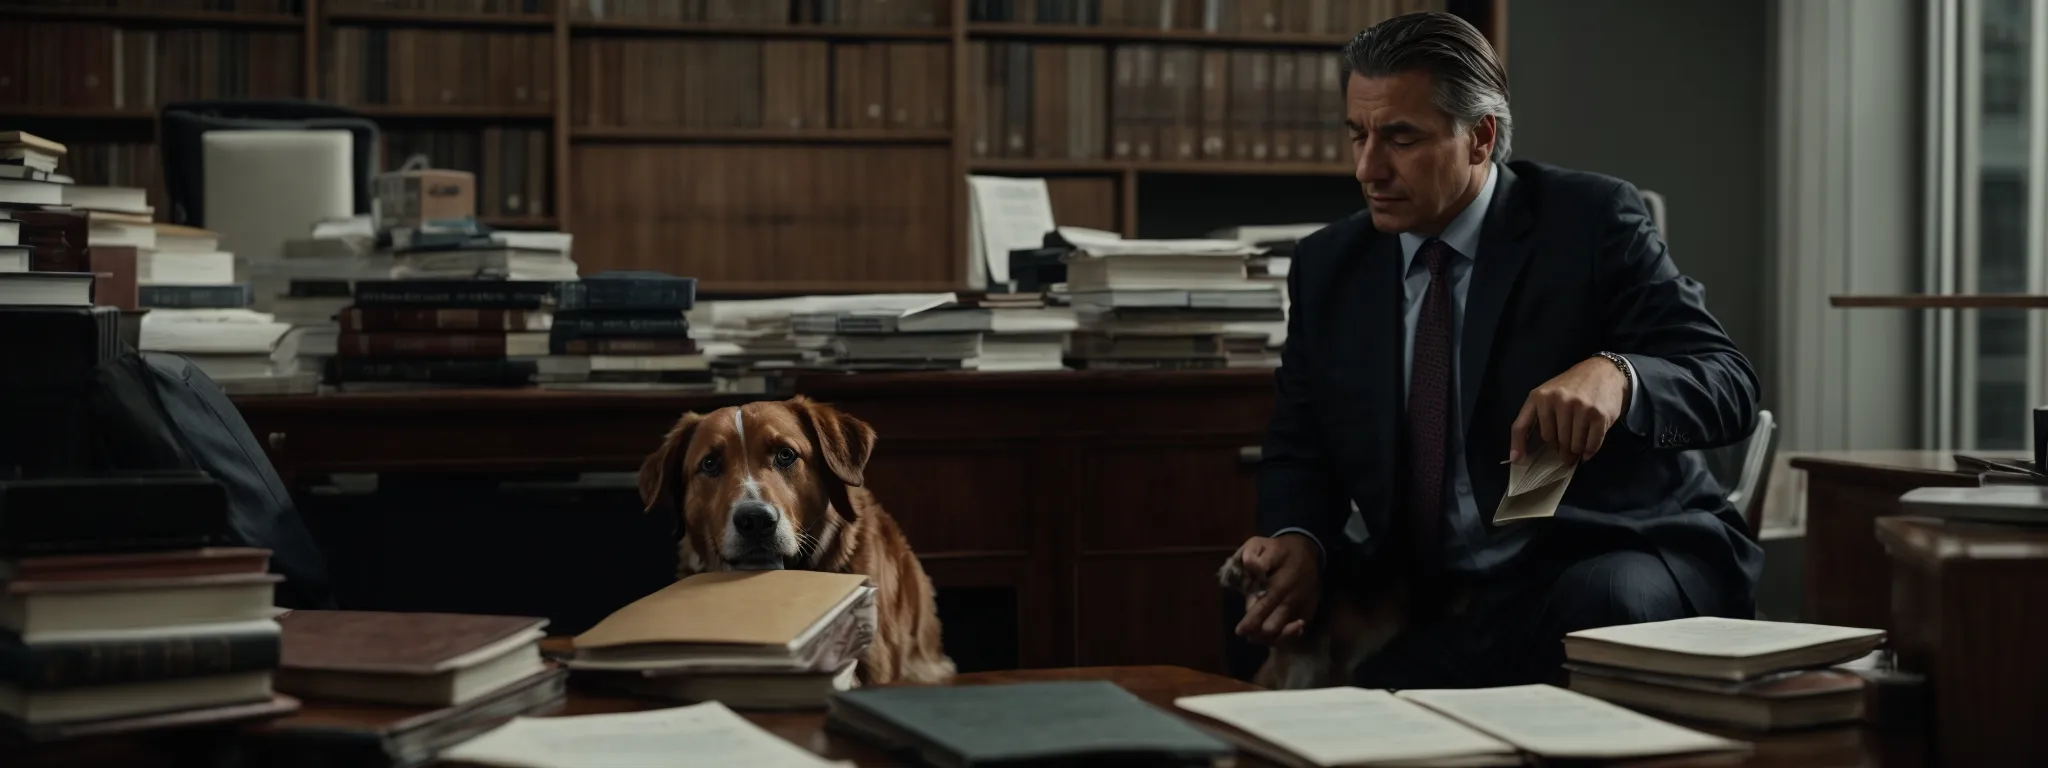 a stern-faced lawyer, flanked by legal books, consults with a distressed dog attack victim in a quiet office.